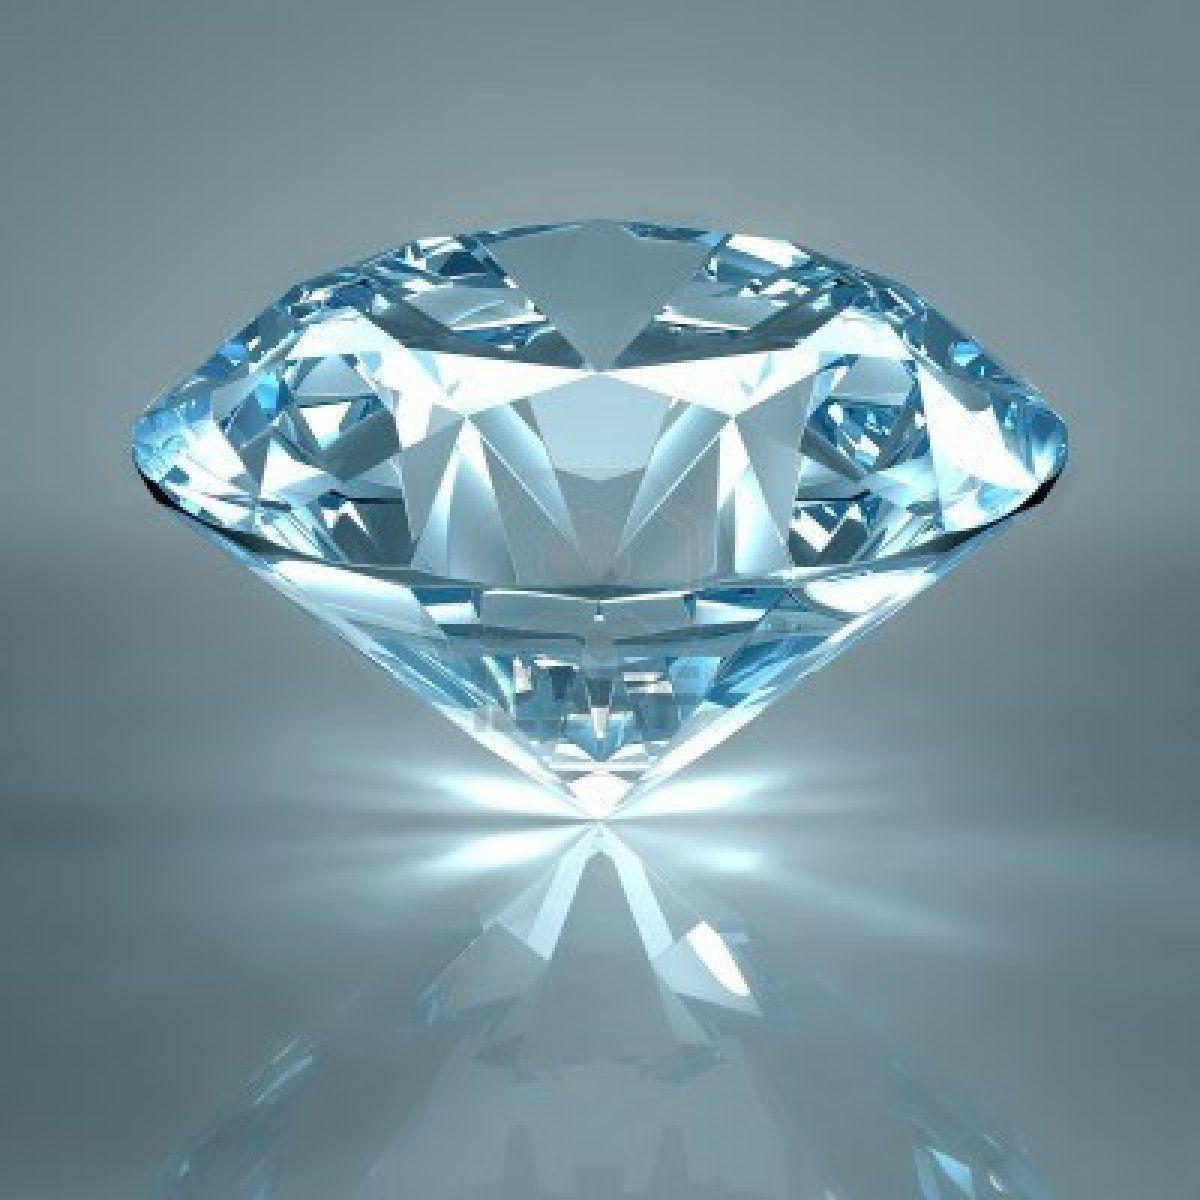 Diamond Background Images - Wallpaper Cave